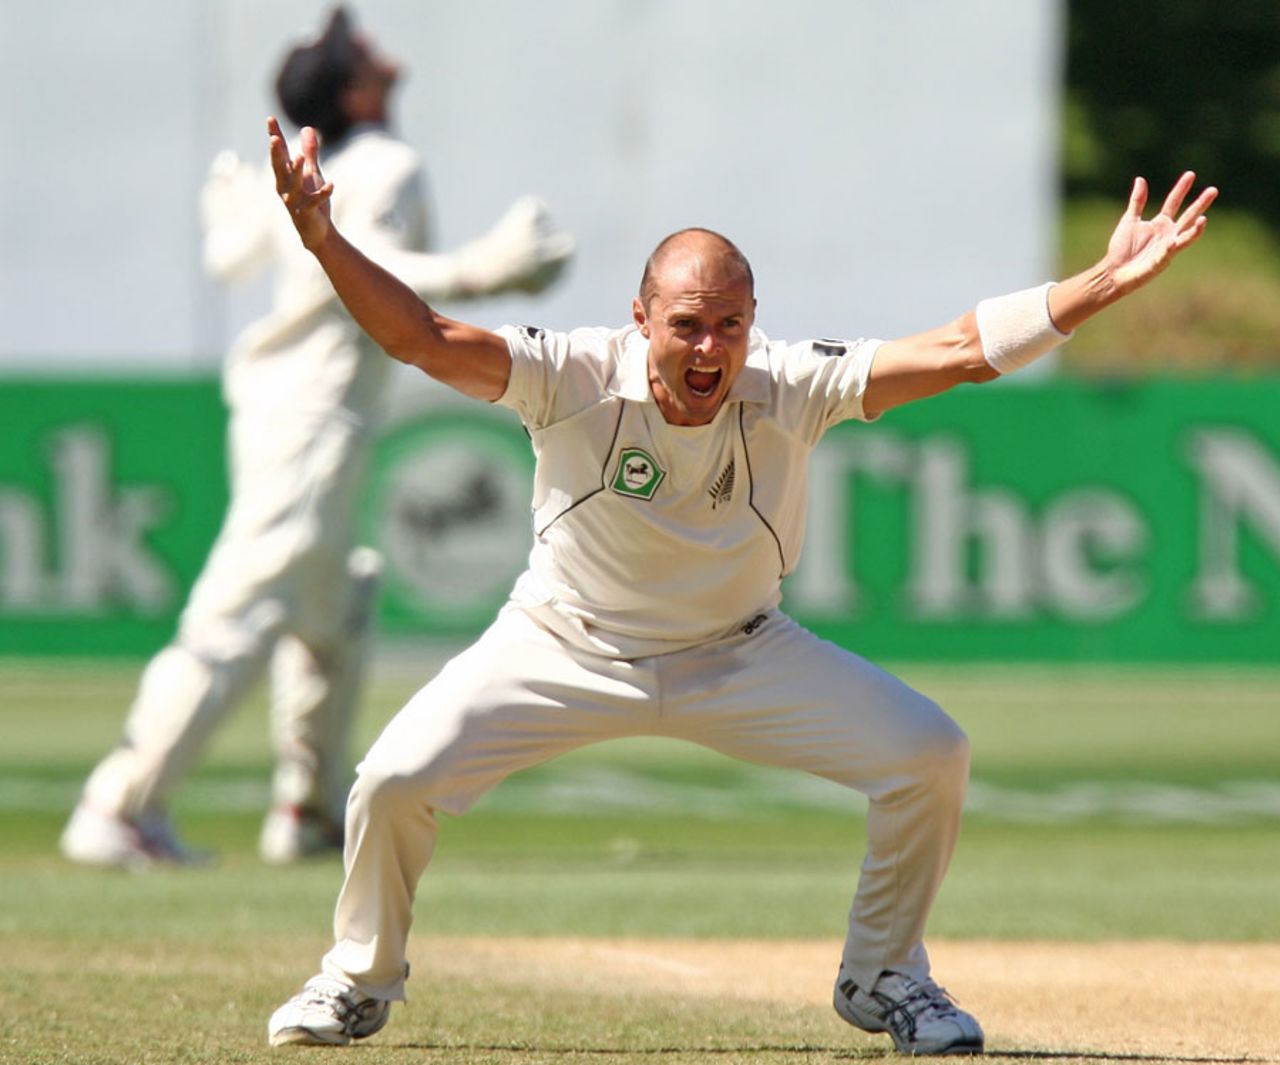 Chris Martin lets out a huge appeal, New Zealand v Pakistan, 2nd Test, Wellington, 5th day, January 19, 2011